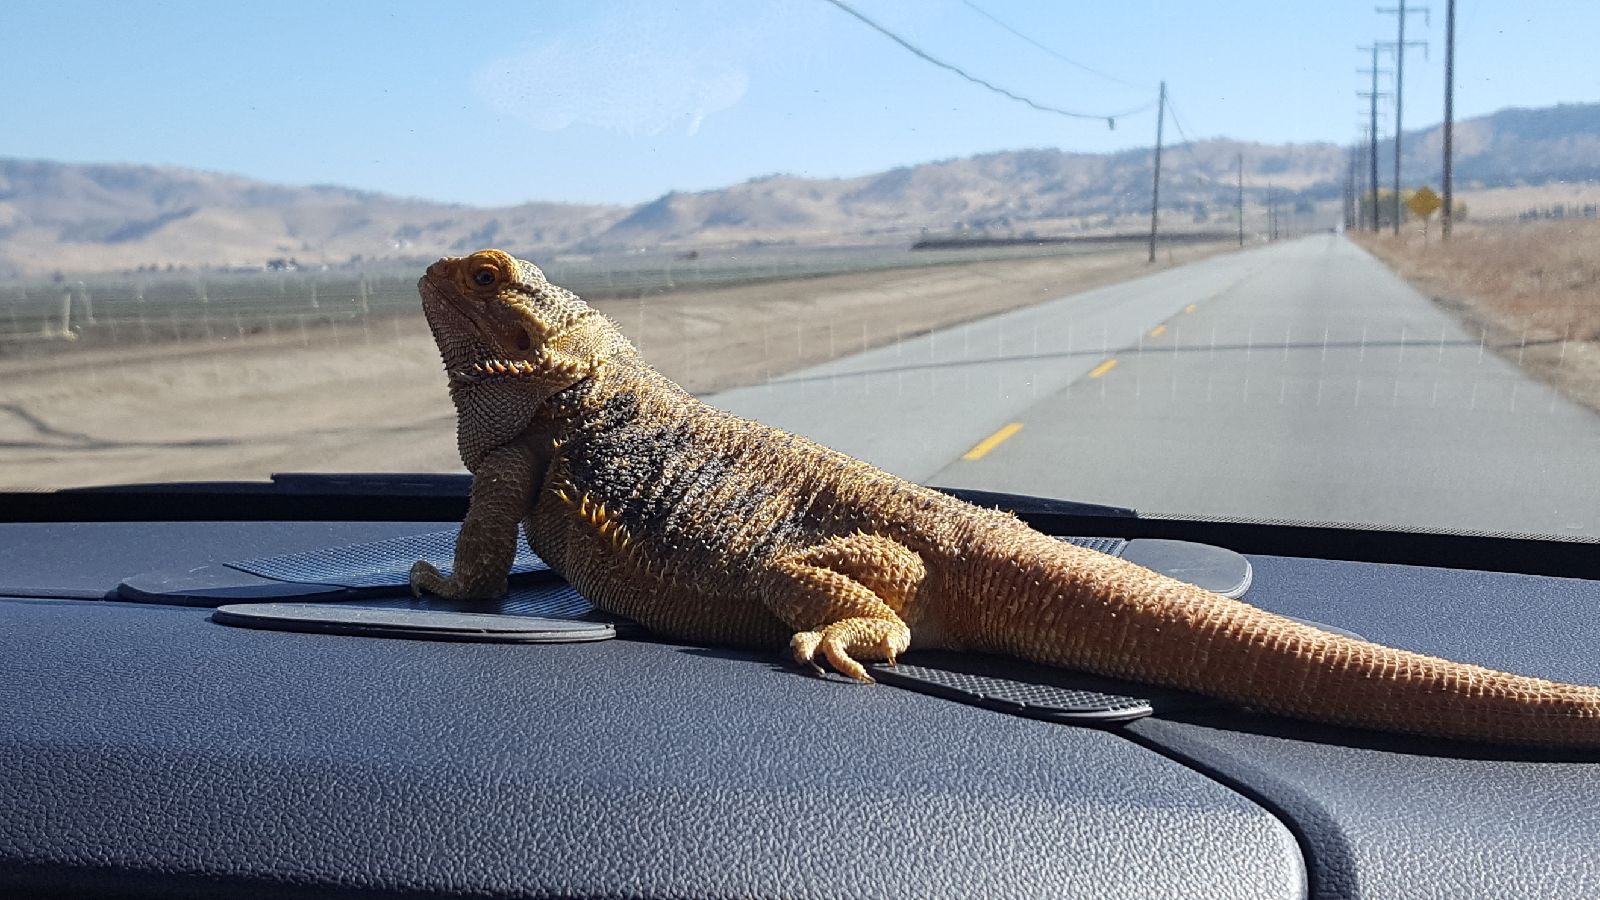 loves the road trips